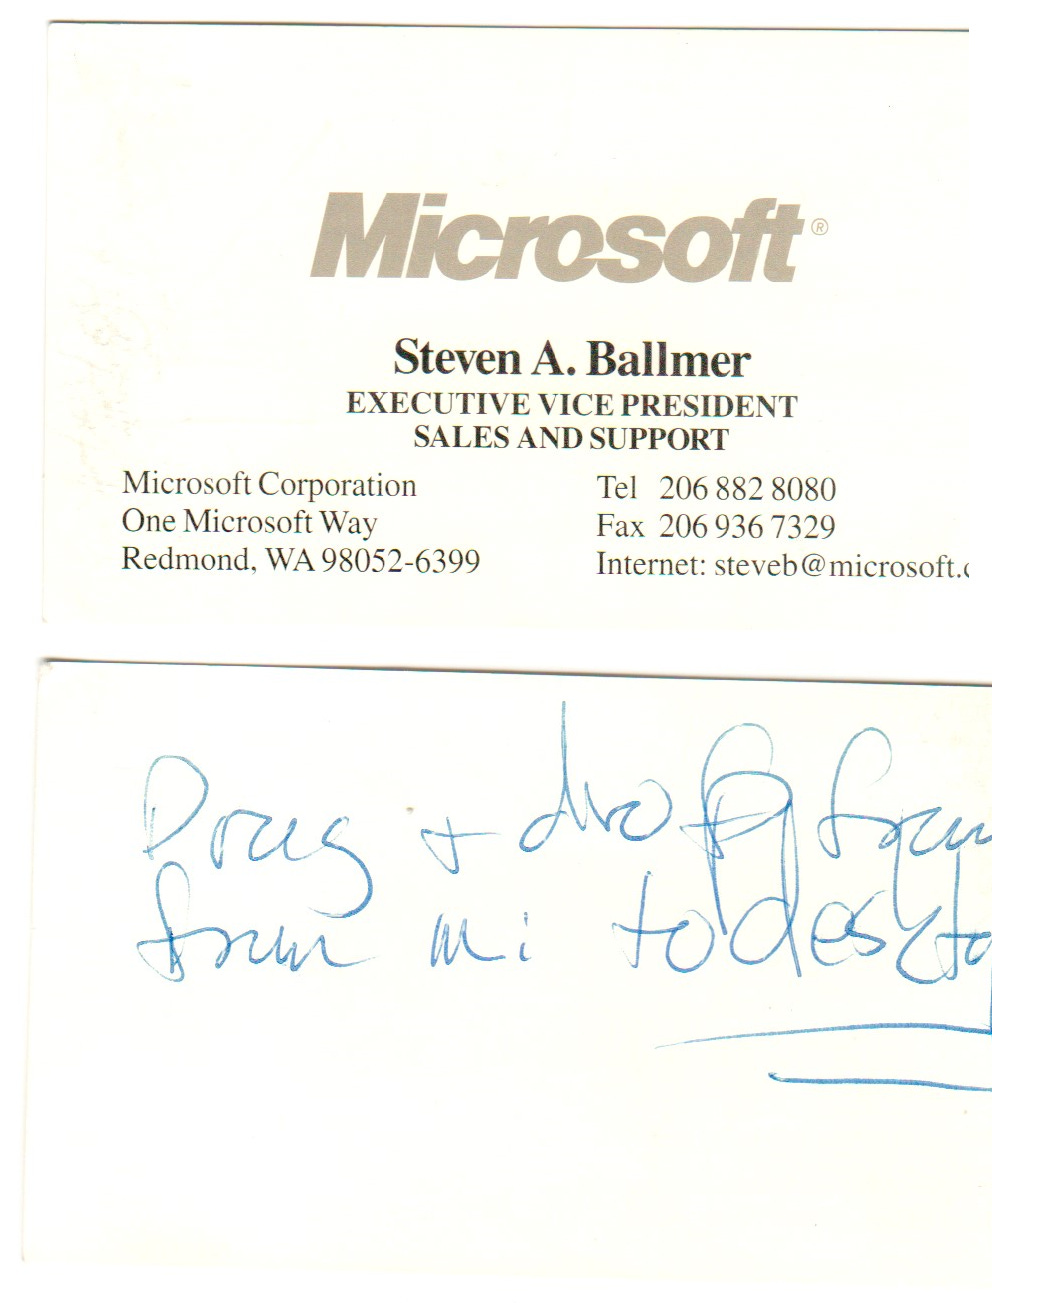 Microsoft business card for Steve Ballmer with notes on the back